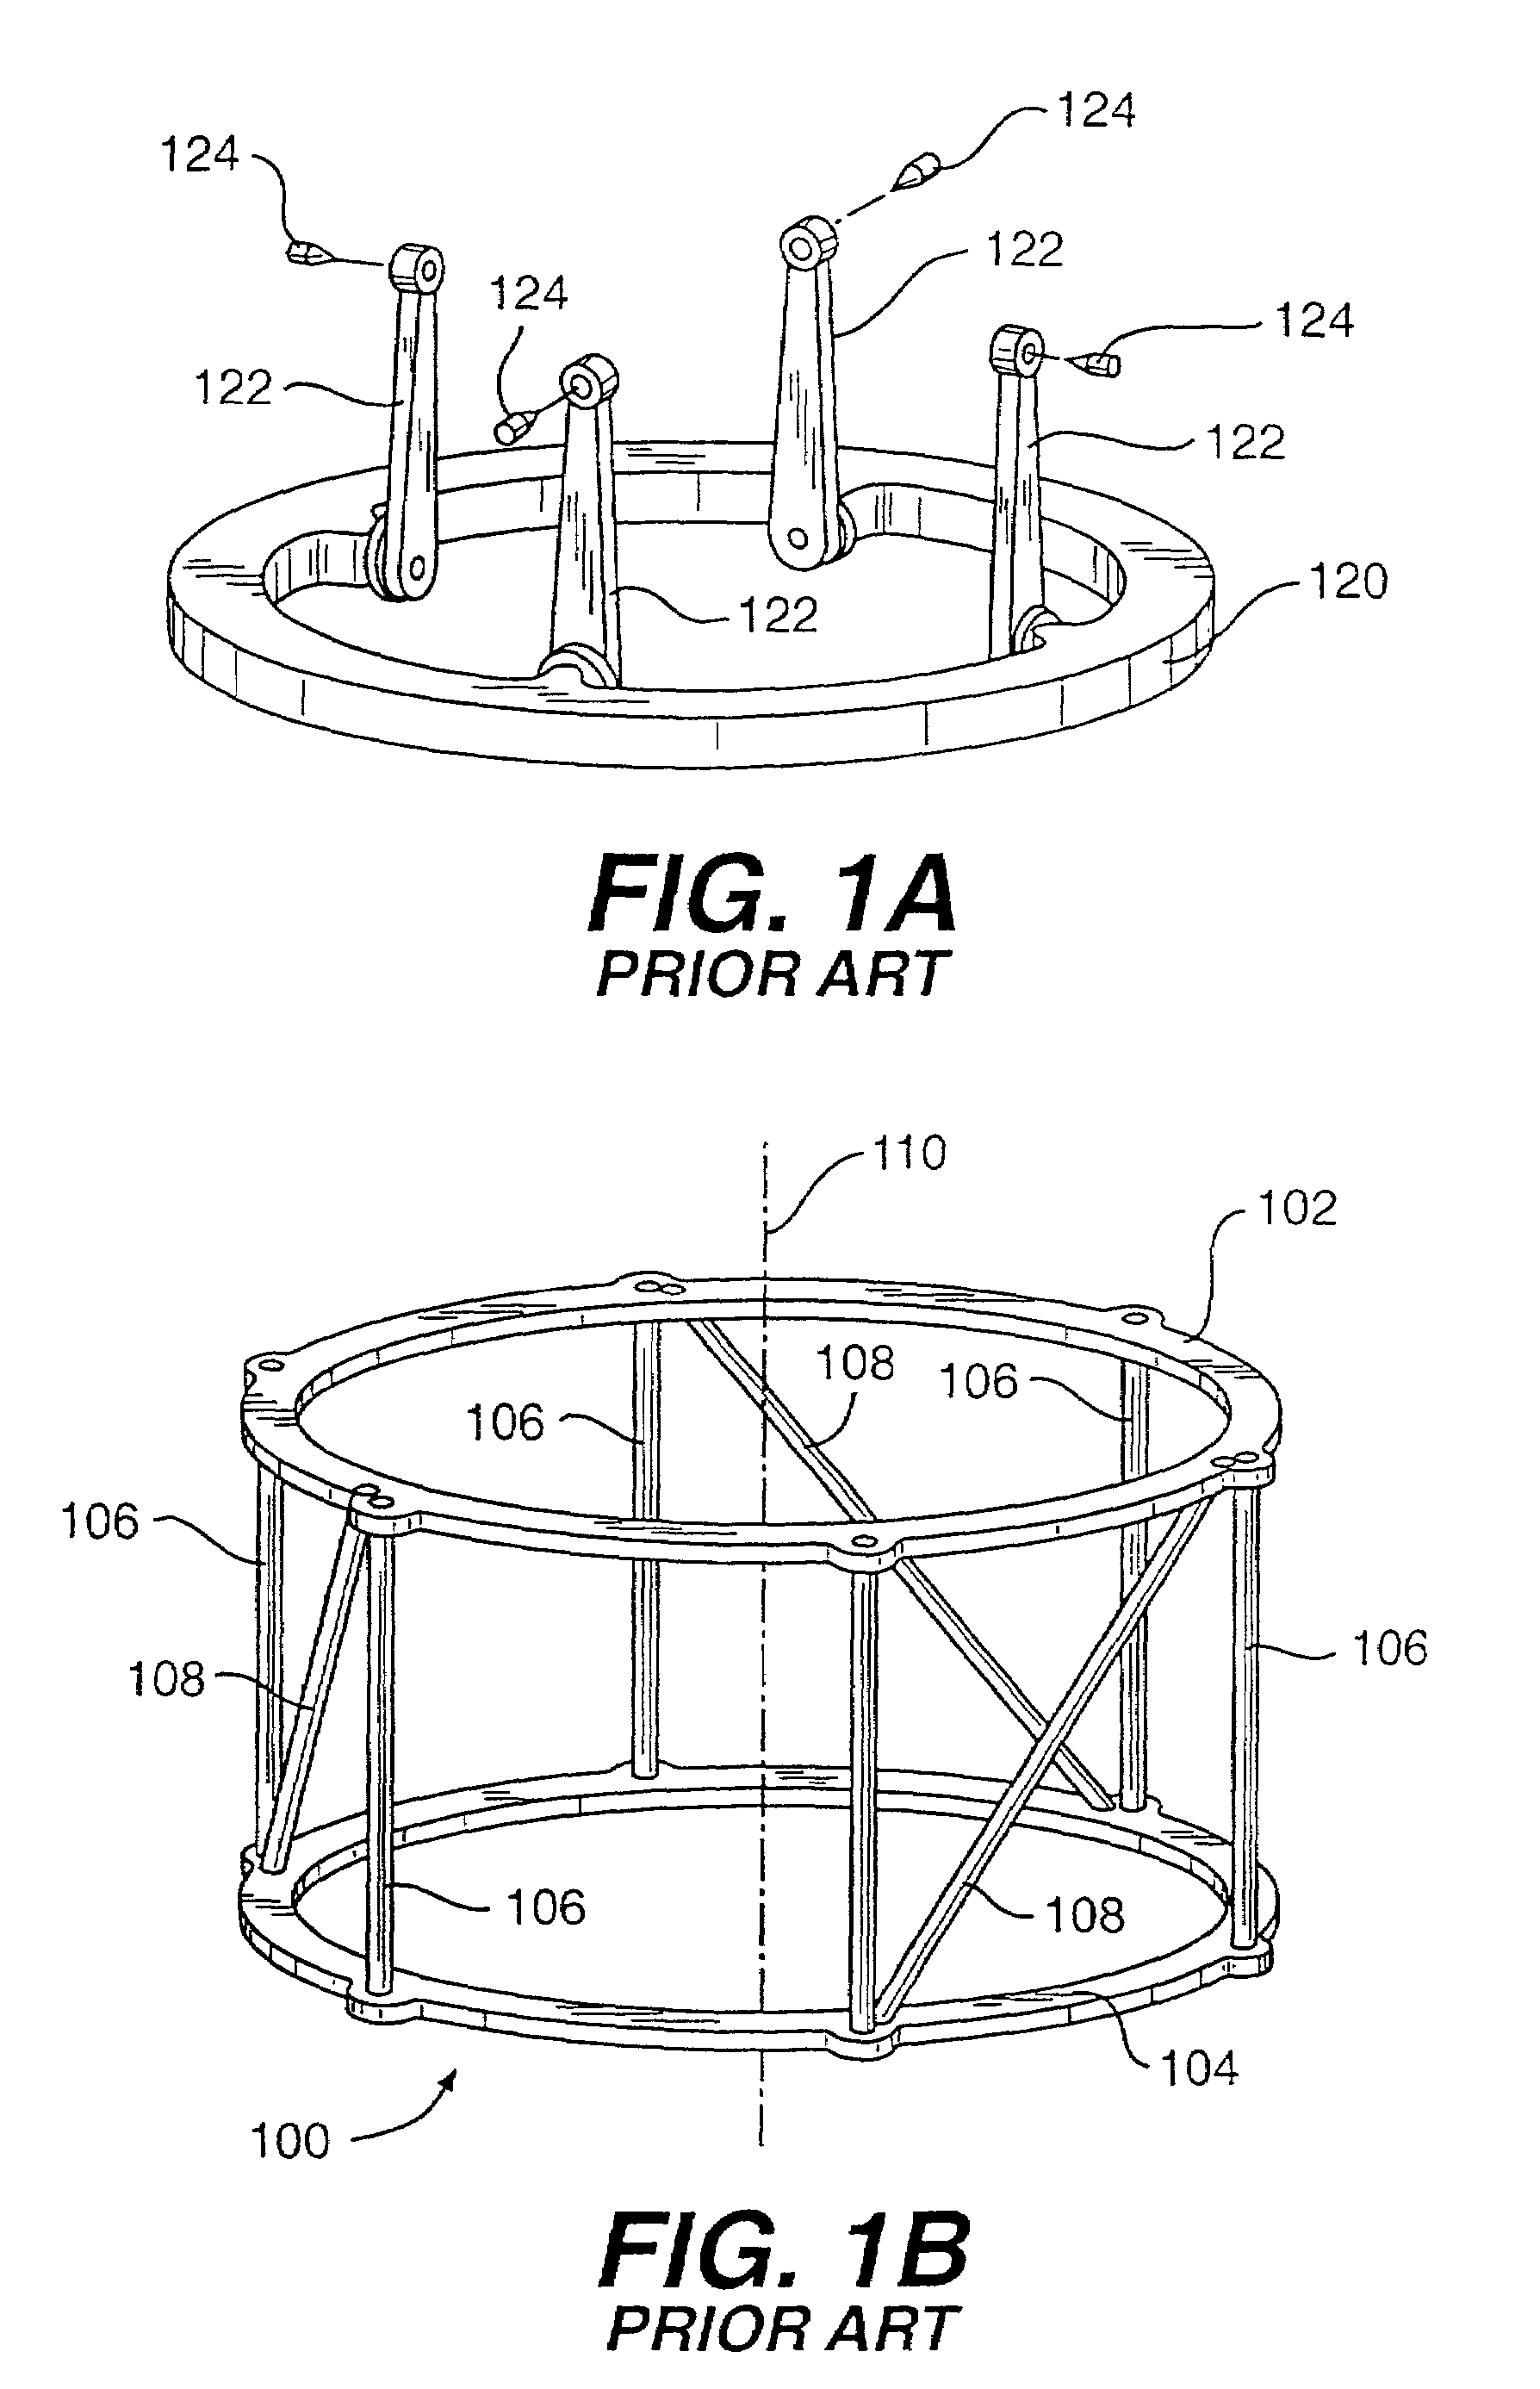 System for indicating the position of a surgical probe within a head on an image of the head